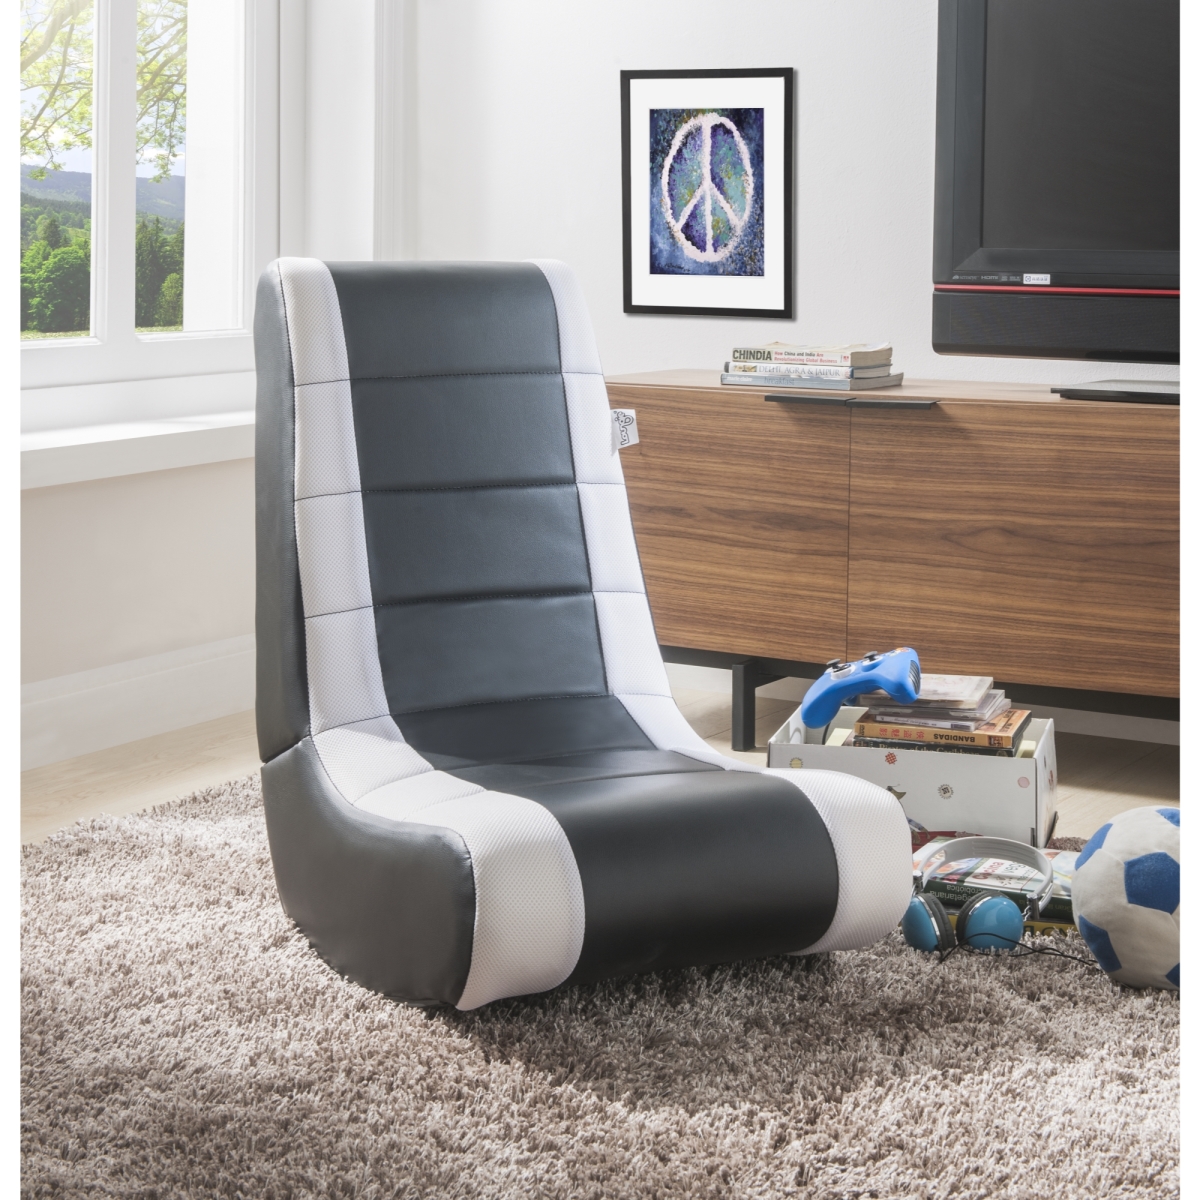 Picture of  Rockme Video Gaming Rocker Chair for Kids Teens Adults &amp; Boys or Girls - Black with White